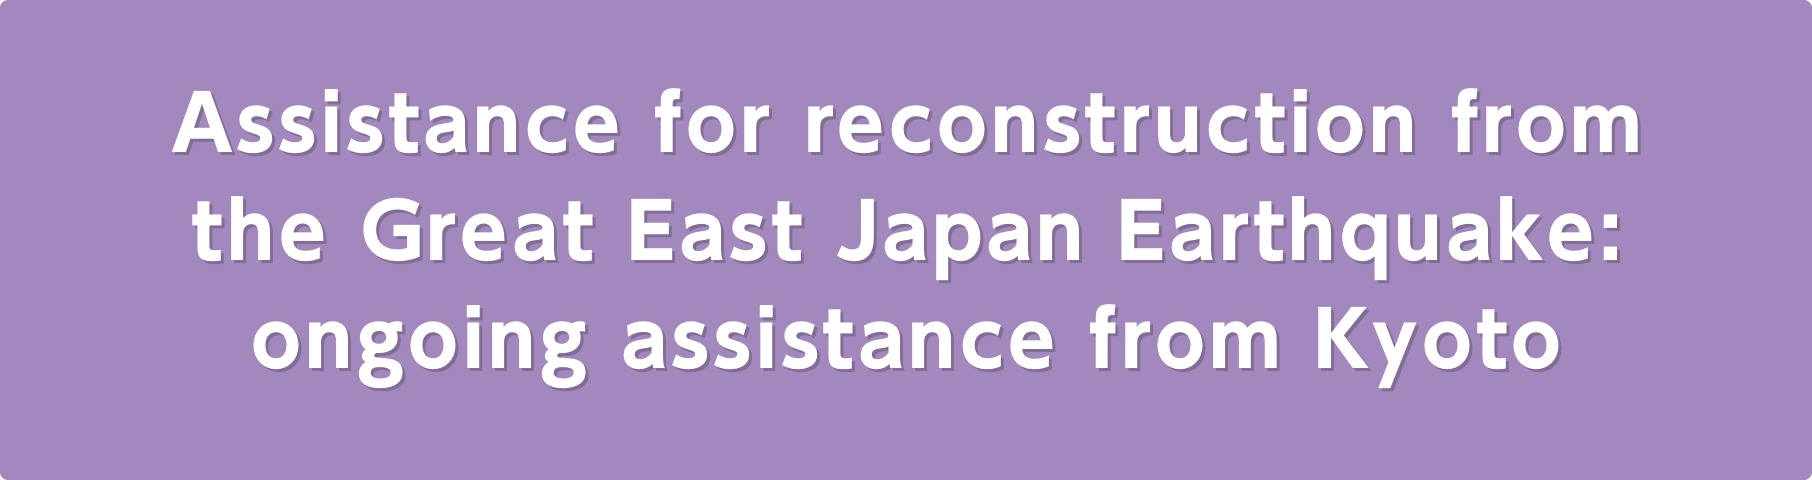 Assistance for reconstruction from the Great East Japan Earthquake: ongoing assistance from Kyoto